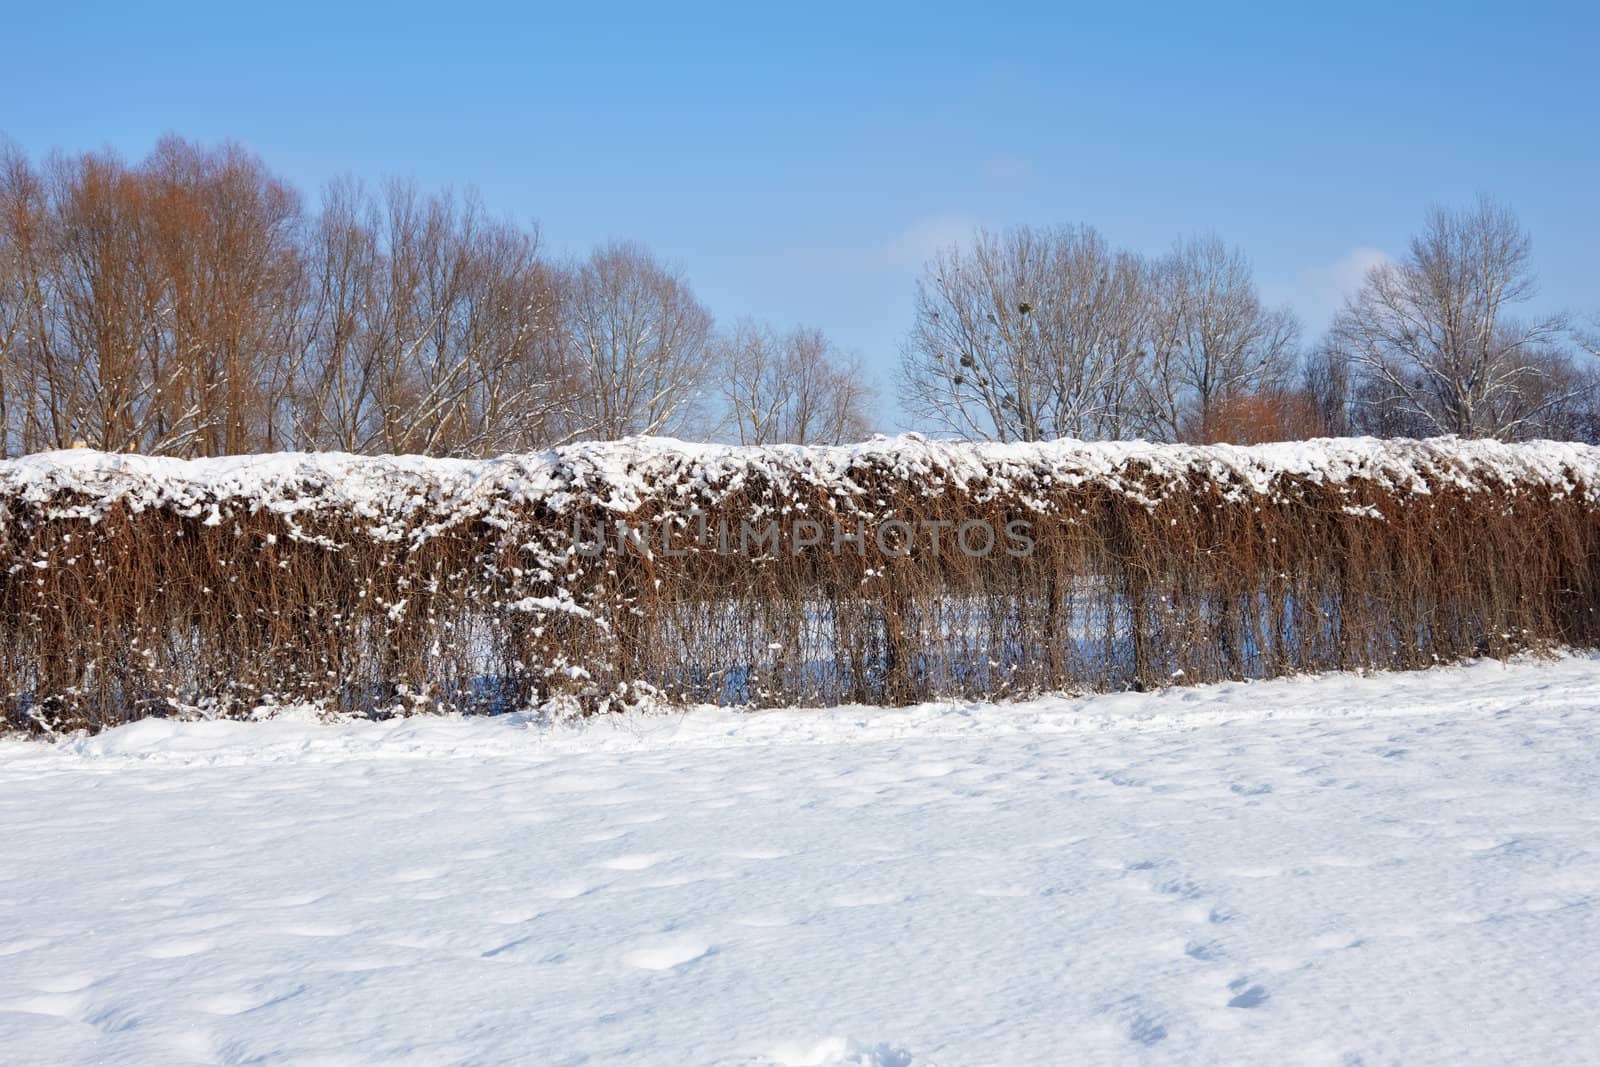 Fence of dried lianas plants in winter park by qiiip